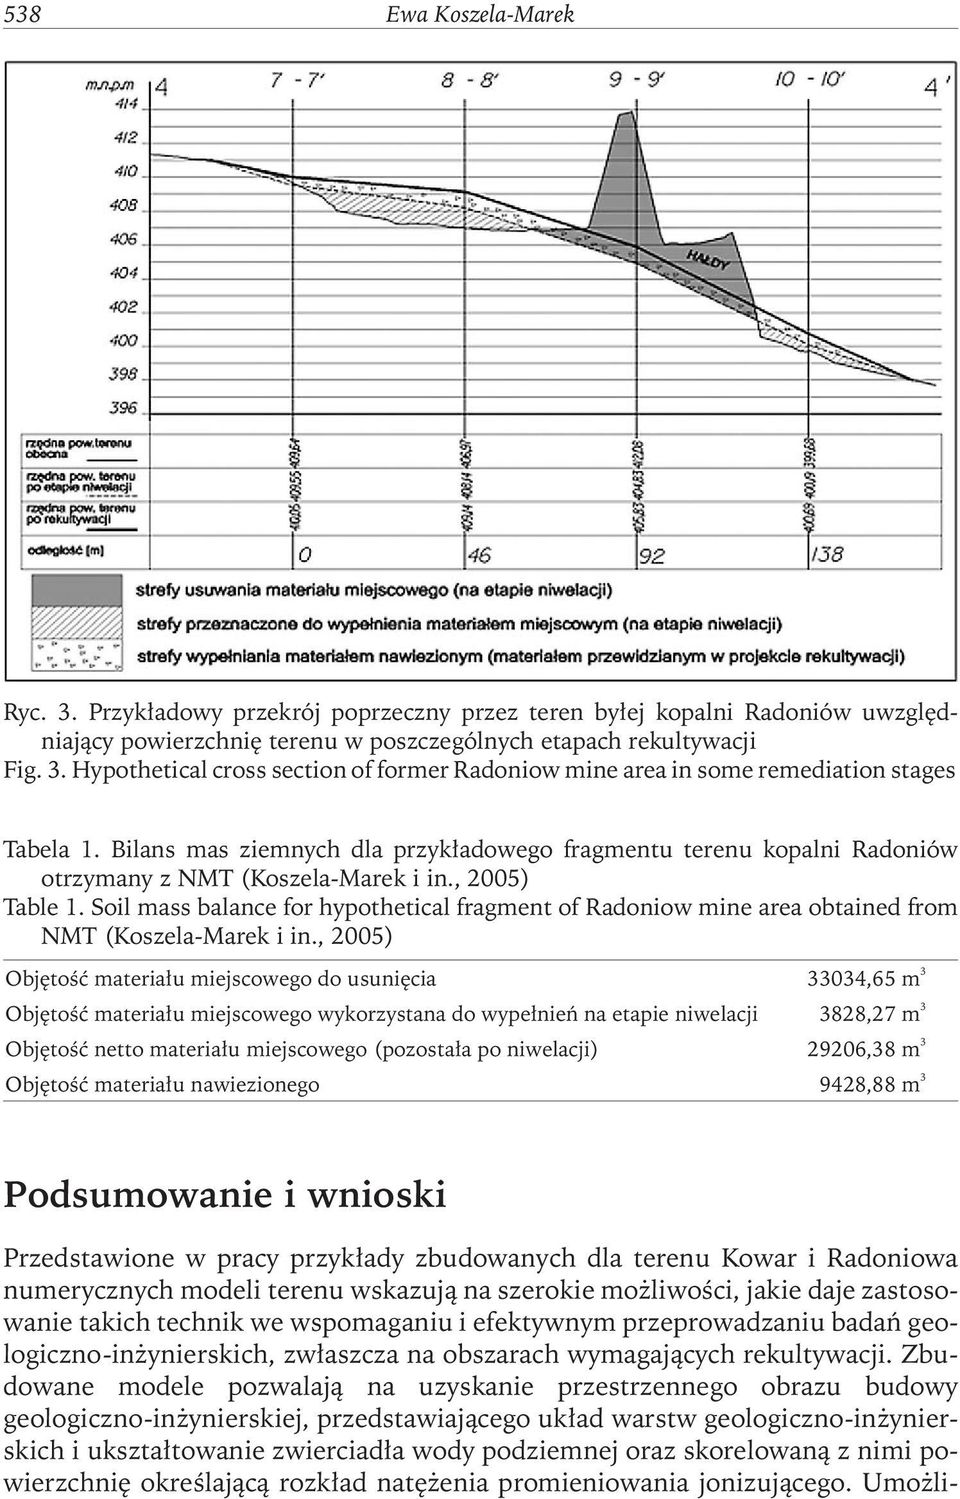 Soil mass balance for hypothetical fragment of Radoniow mine area obtained from NMT (Koszela-Marek i in.